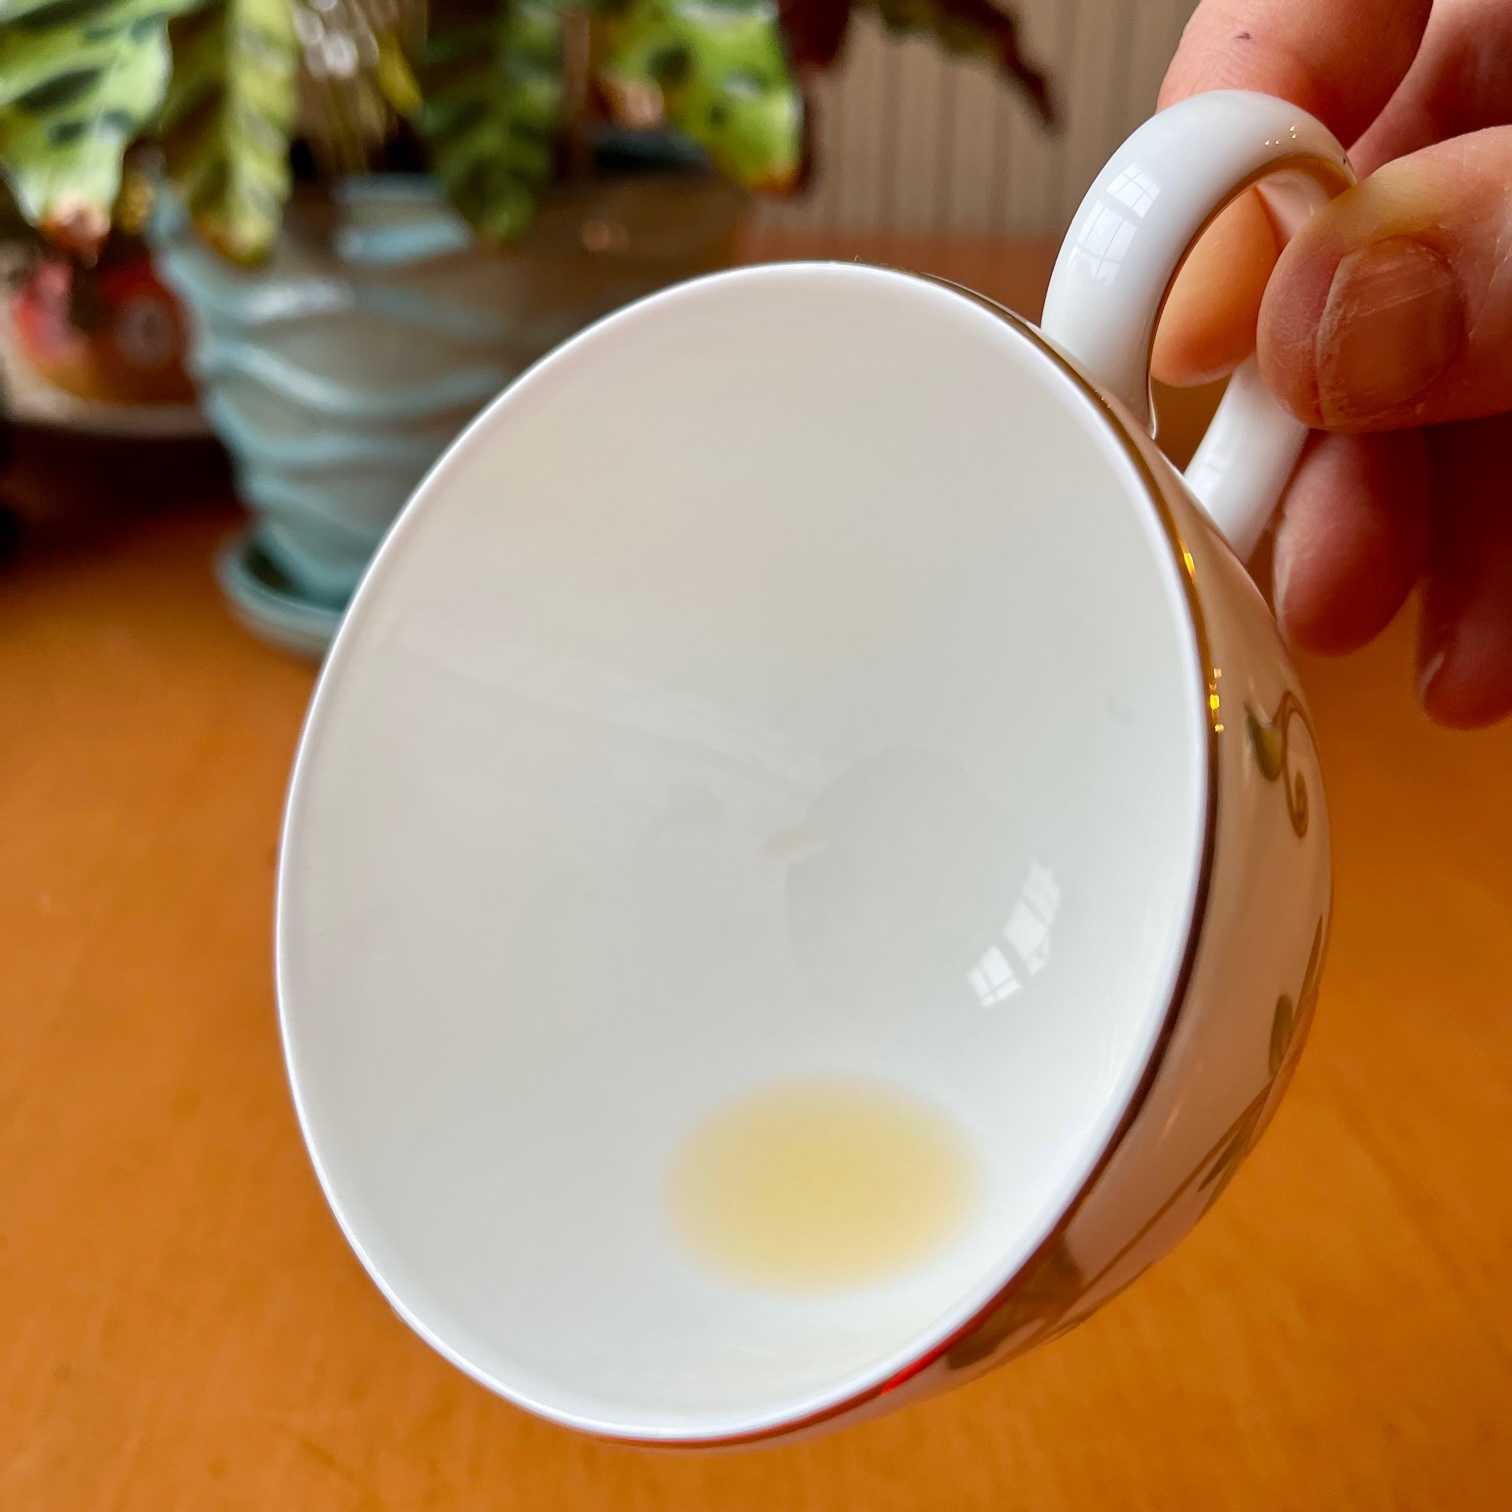 Teacup with a few drops of tea in it, poised as if ready to pour.